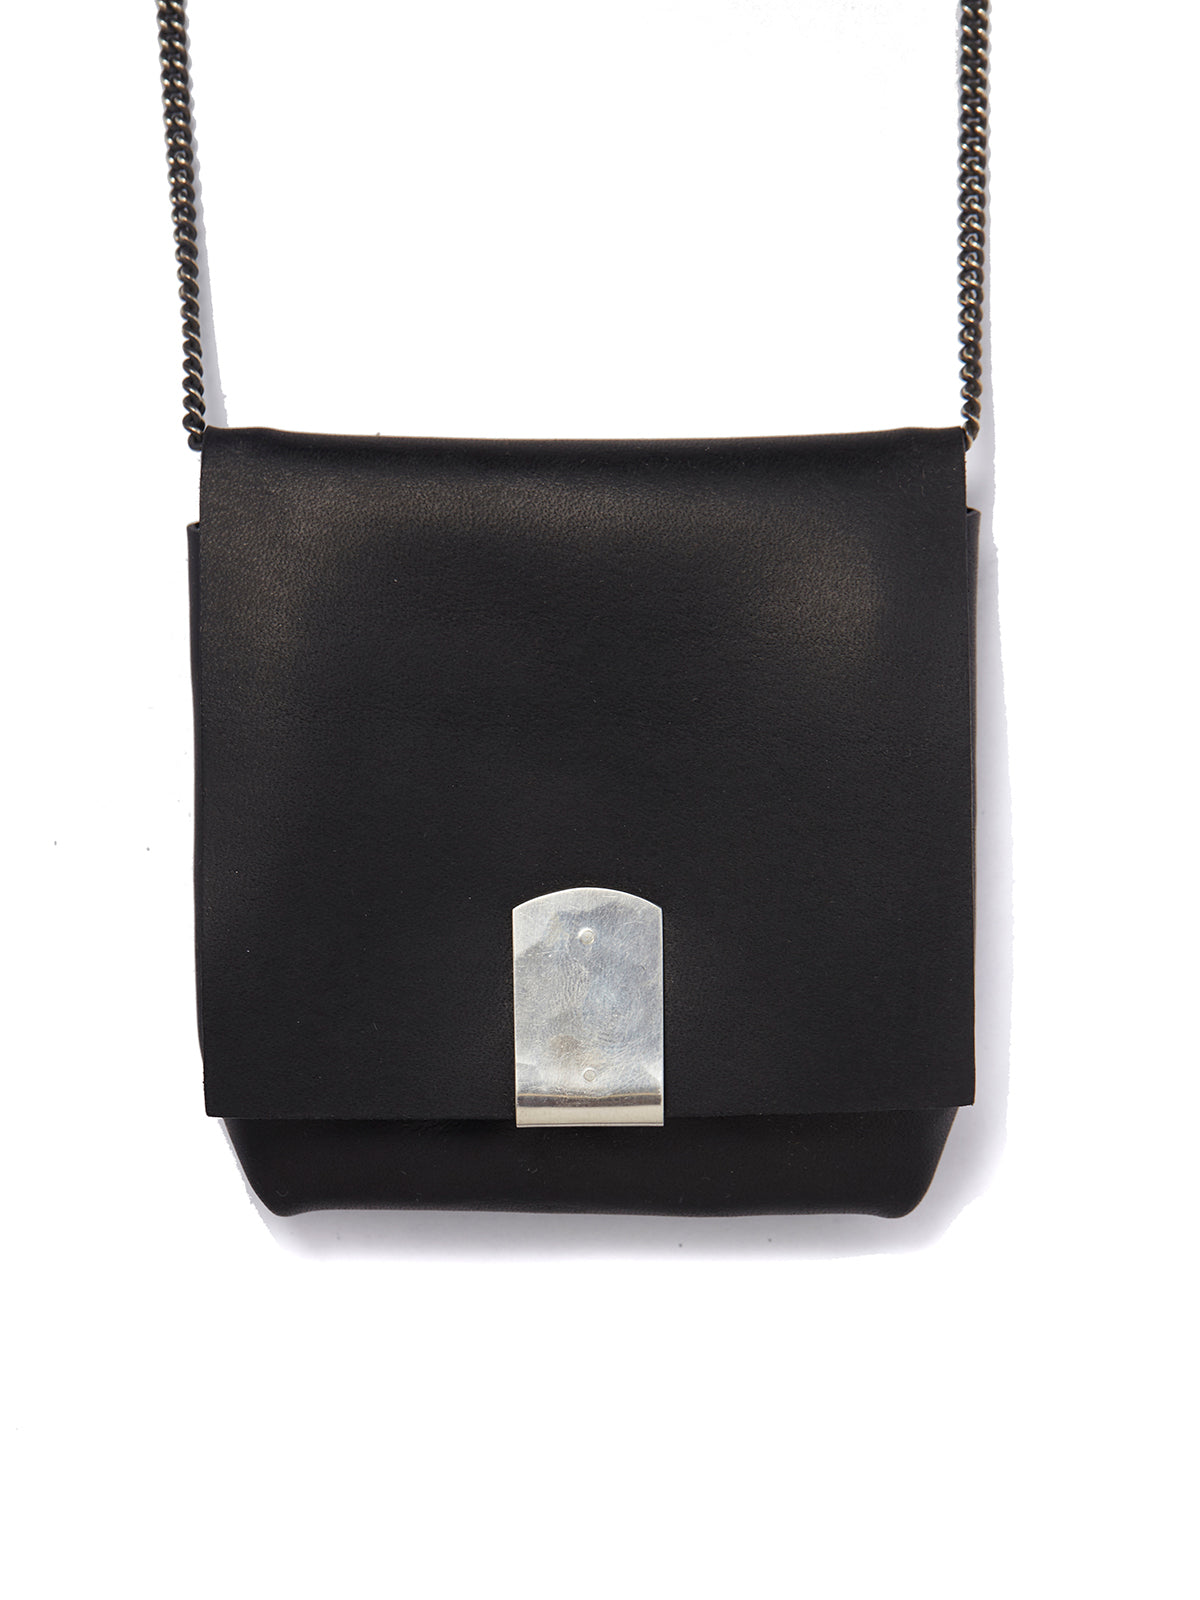 Black Leather Mini Neck Handbag with Silver Chain and Closure for Men